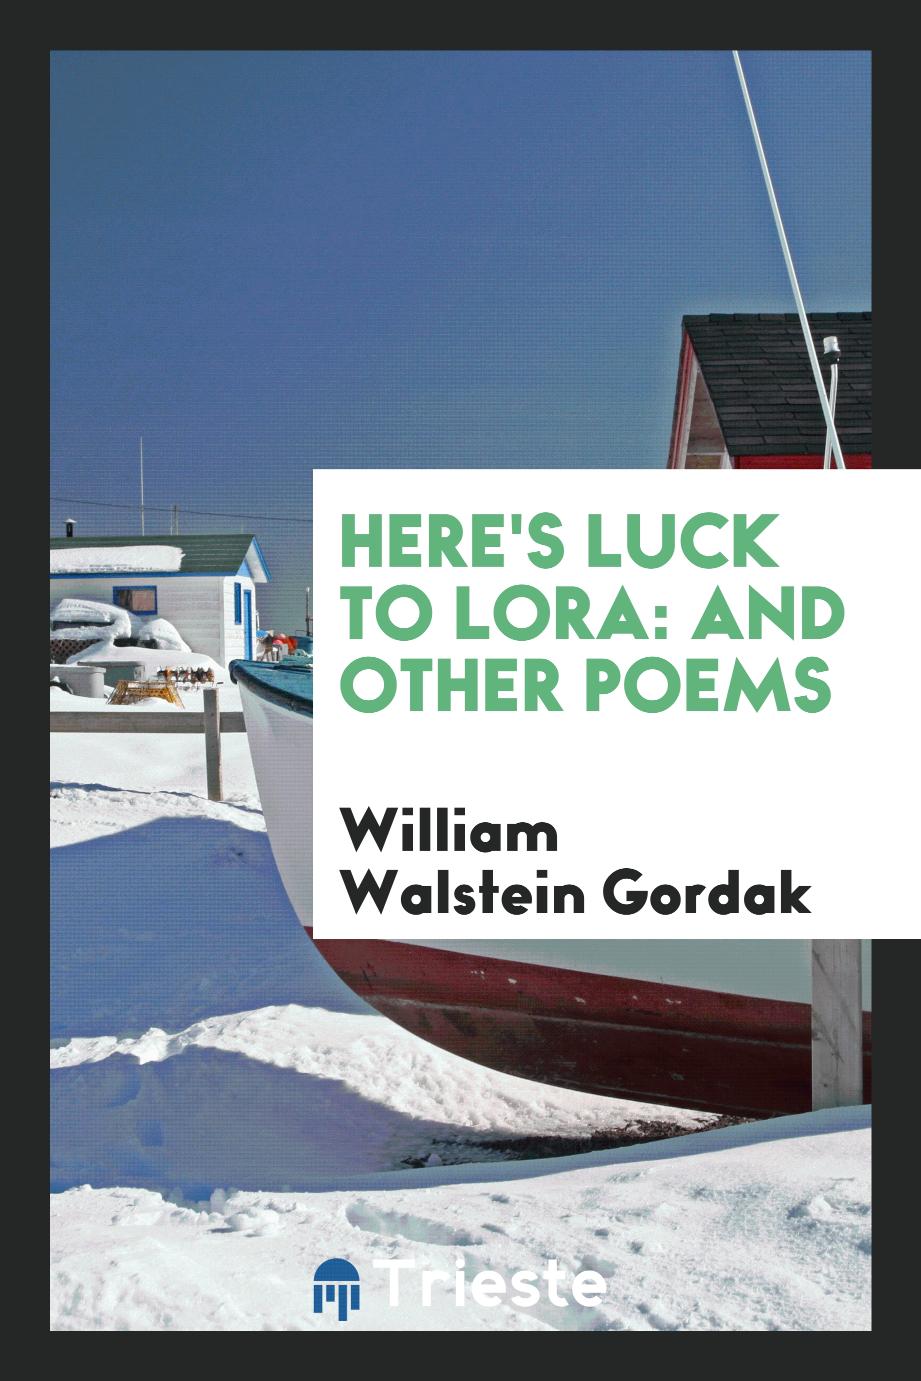 Here's Luck to Lora: And Other Poems